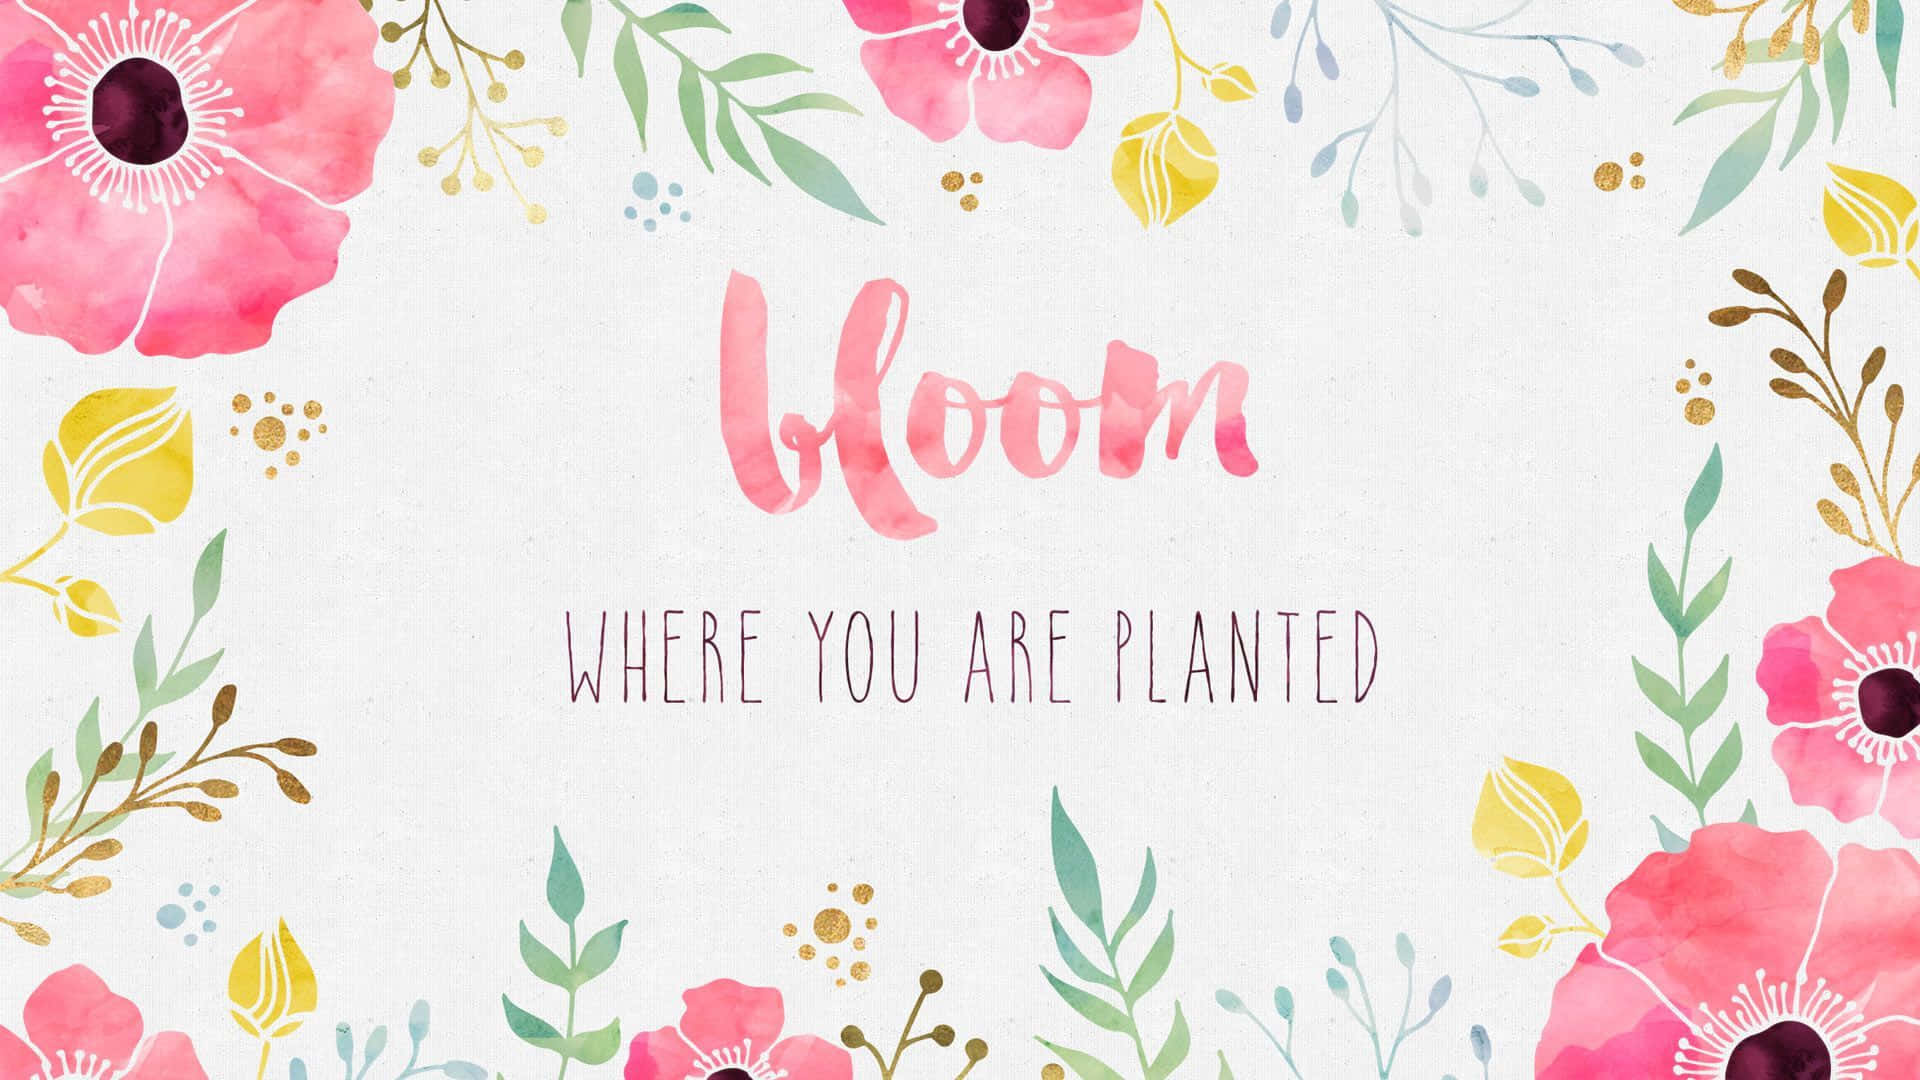 Inspirational Spring Quote on a Beautiful Background Wallpaper